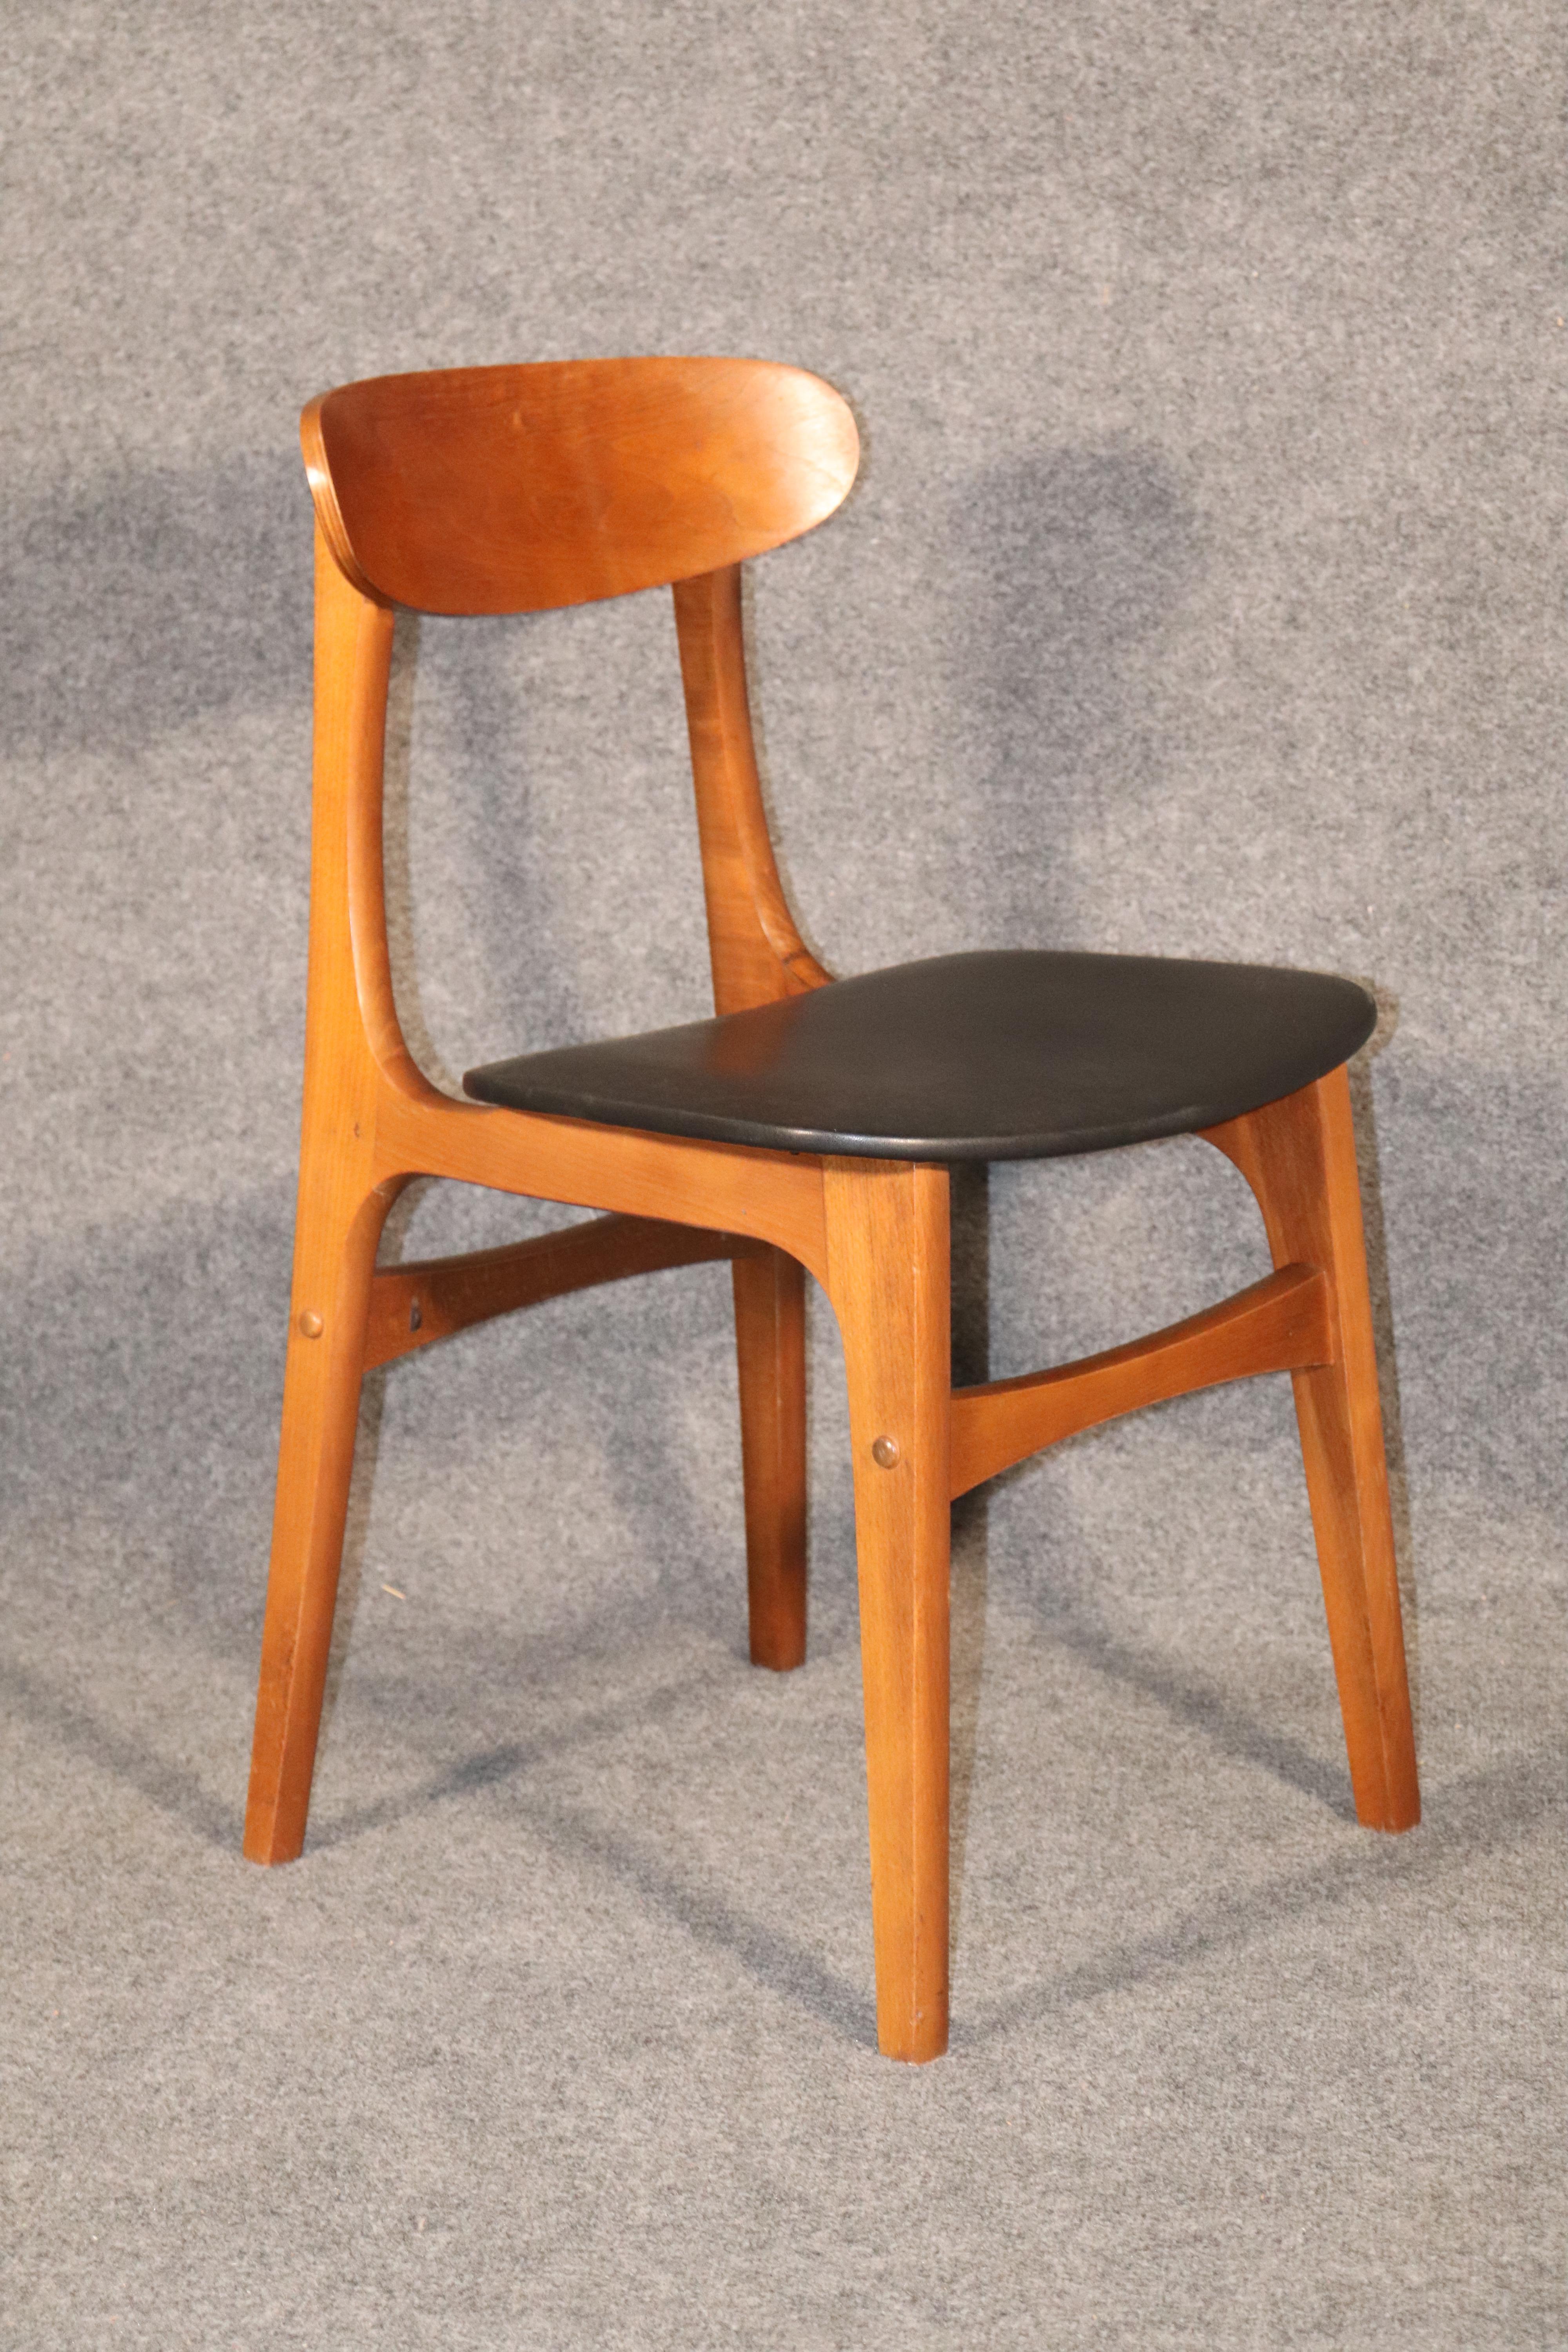 Set of four Mid-Century Modern dining chairs in walnut wood frame. Vinyl seat coverings and sculpted wood backs.
Please confirm location.